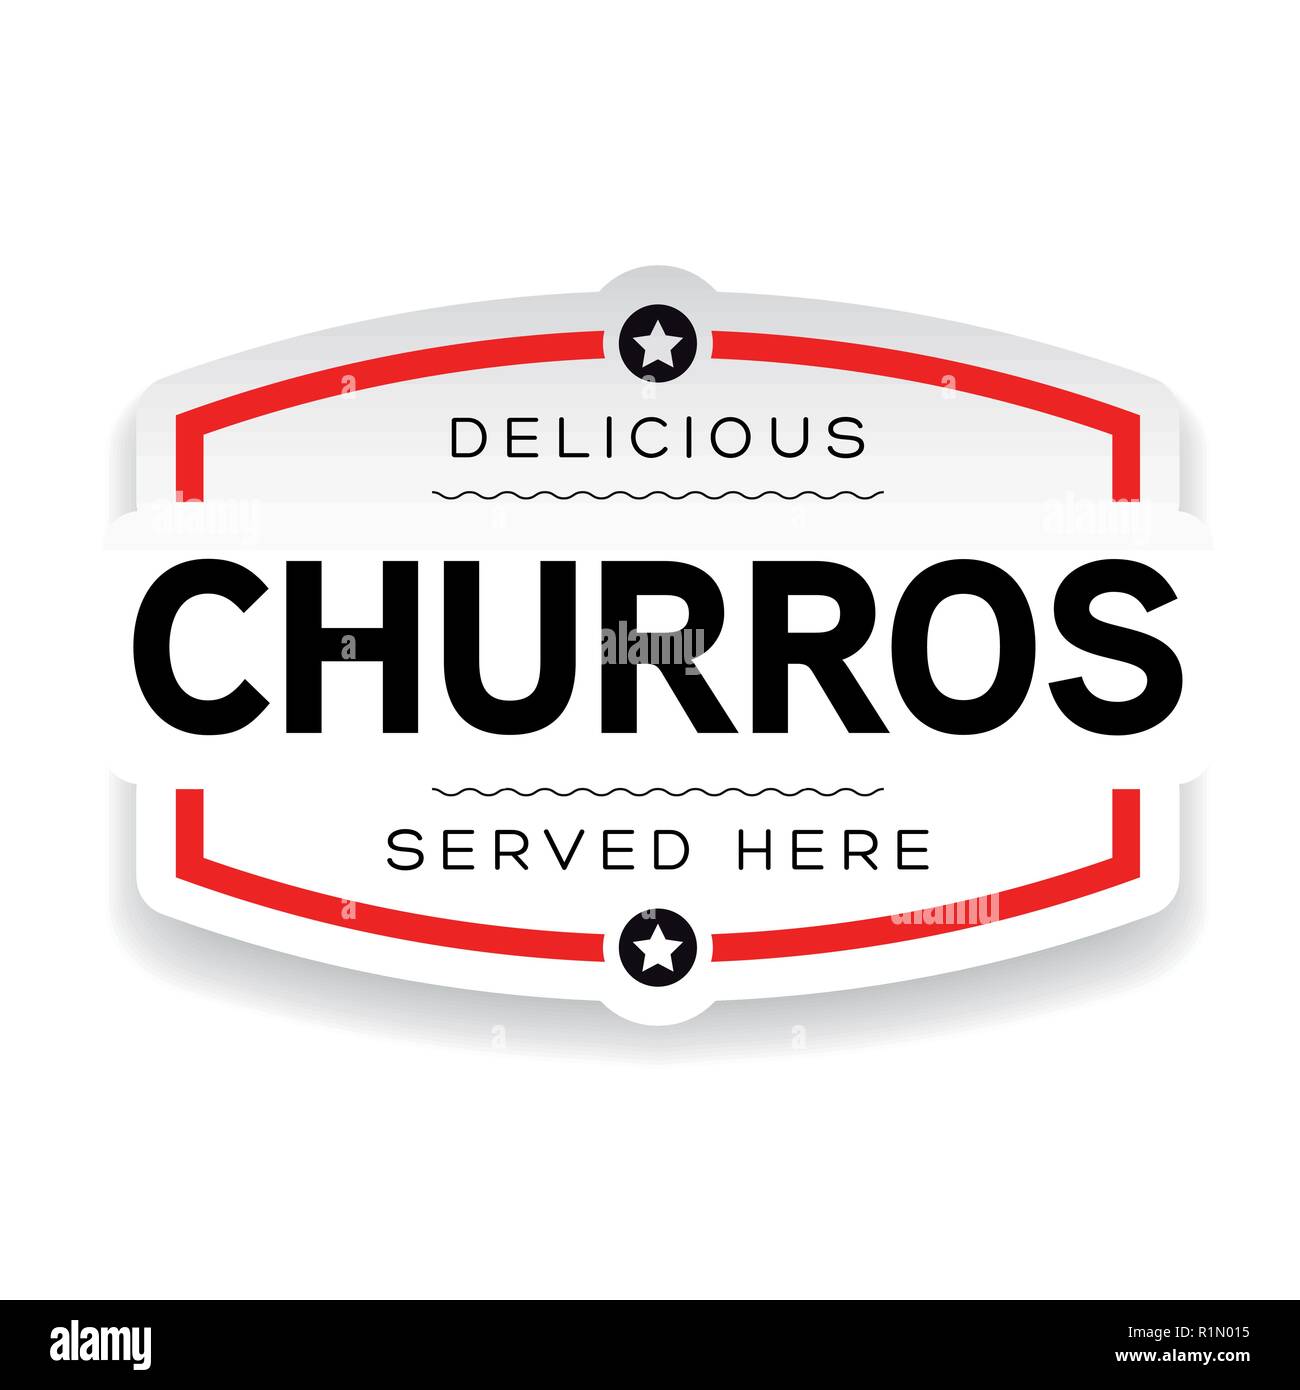 Churros vintage label sign Stock Vector